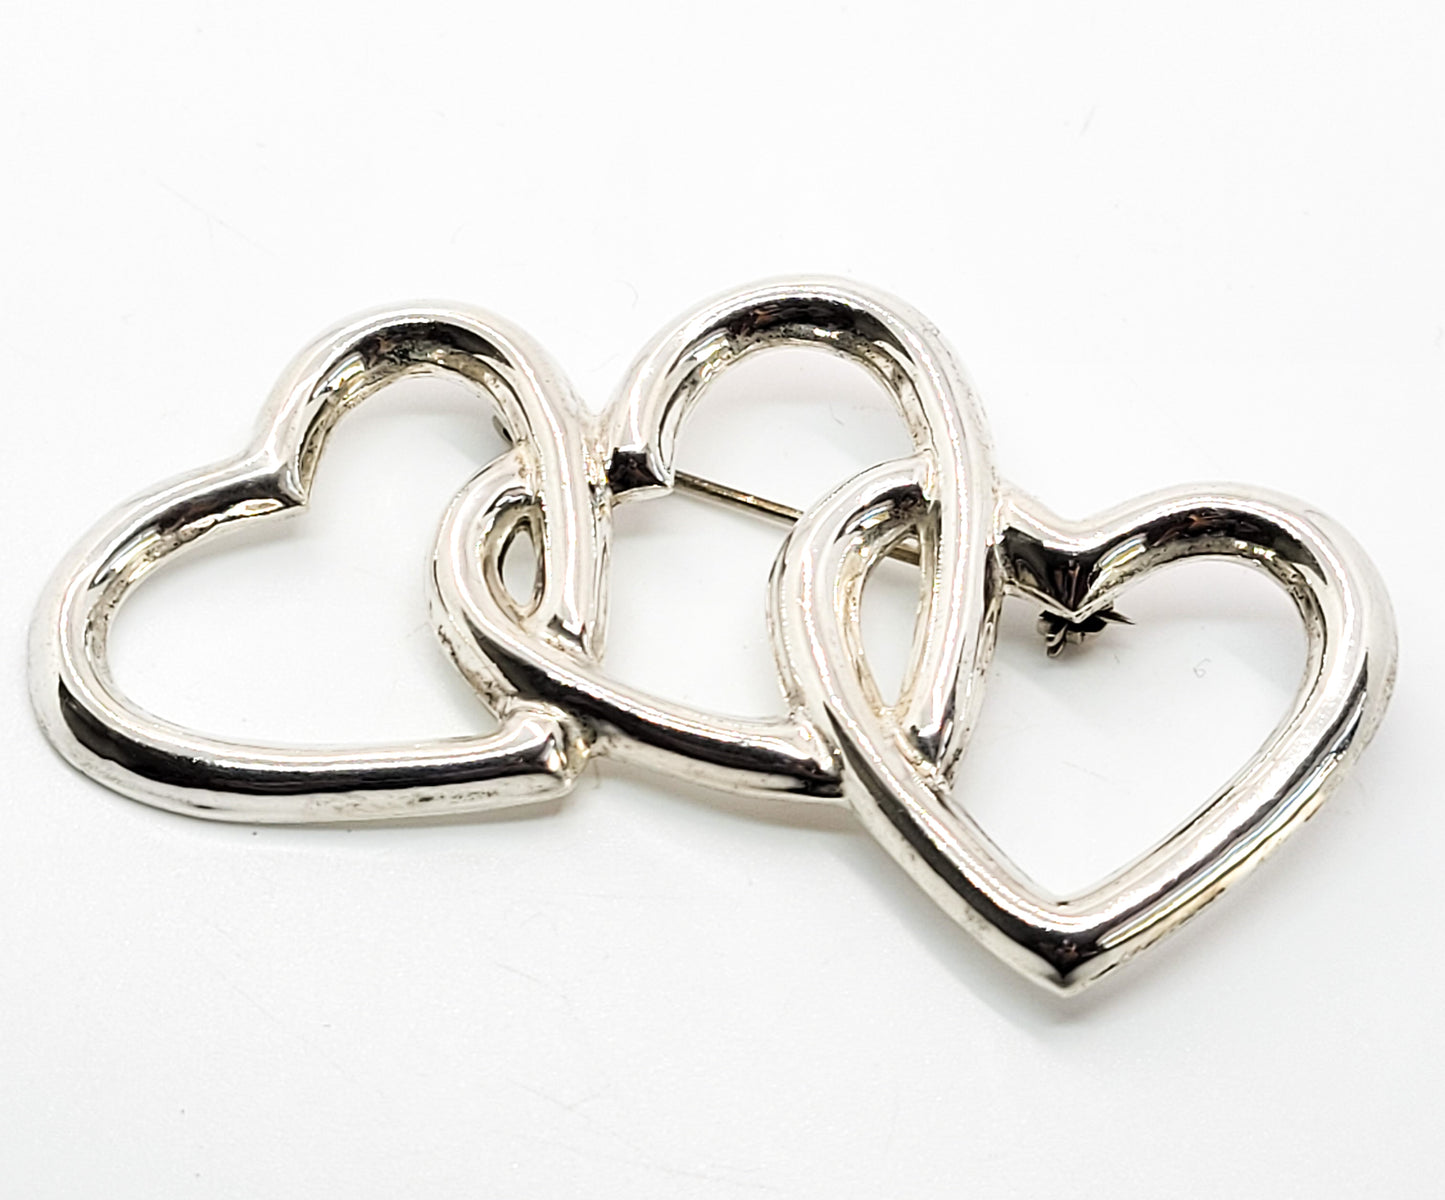 Tripple open heart 3 Love Taxco Mexico signed TR-52 vintage sterling silver brooch 925